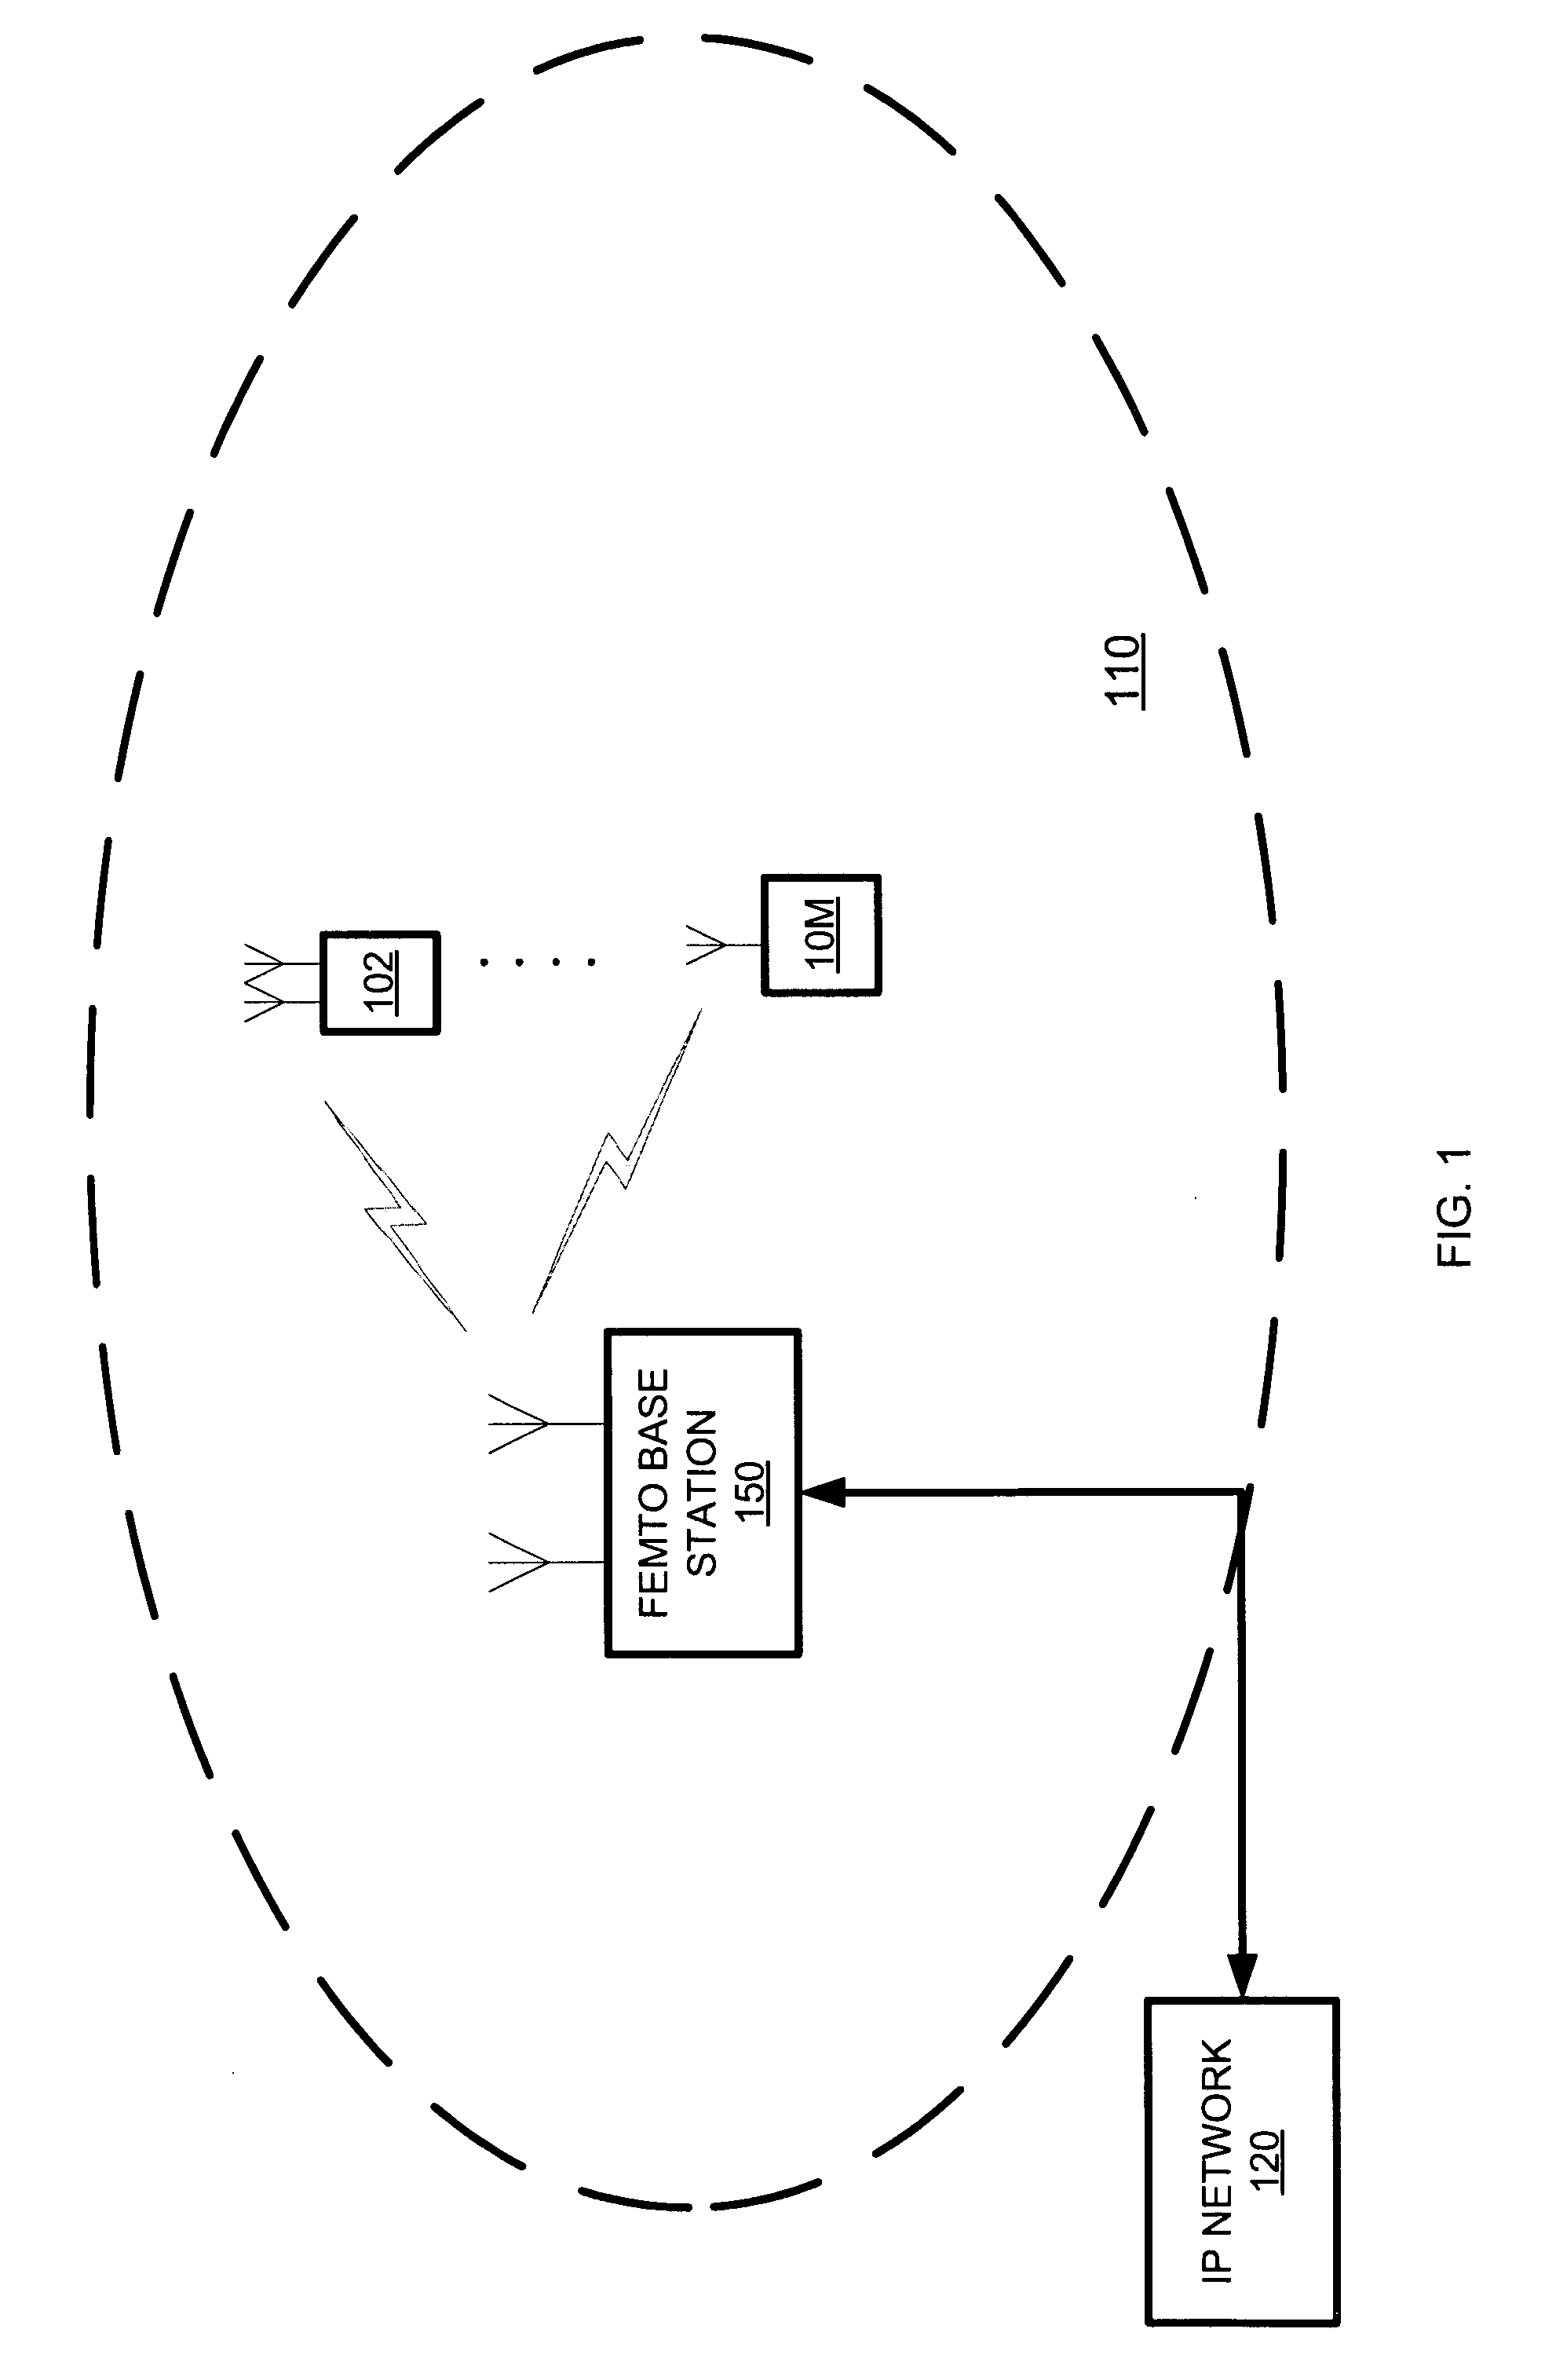 Femto base stations and methods for operating the same